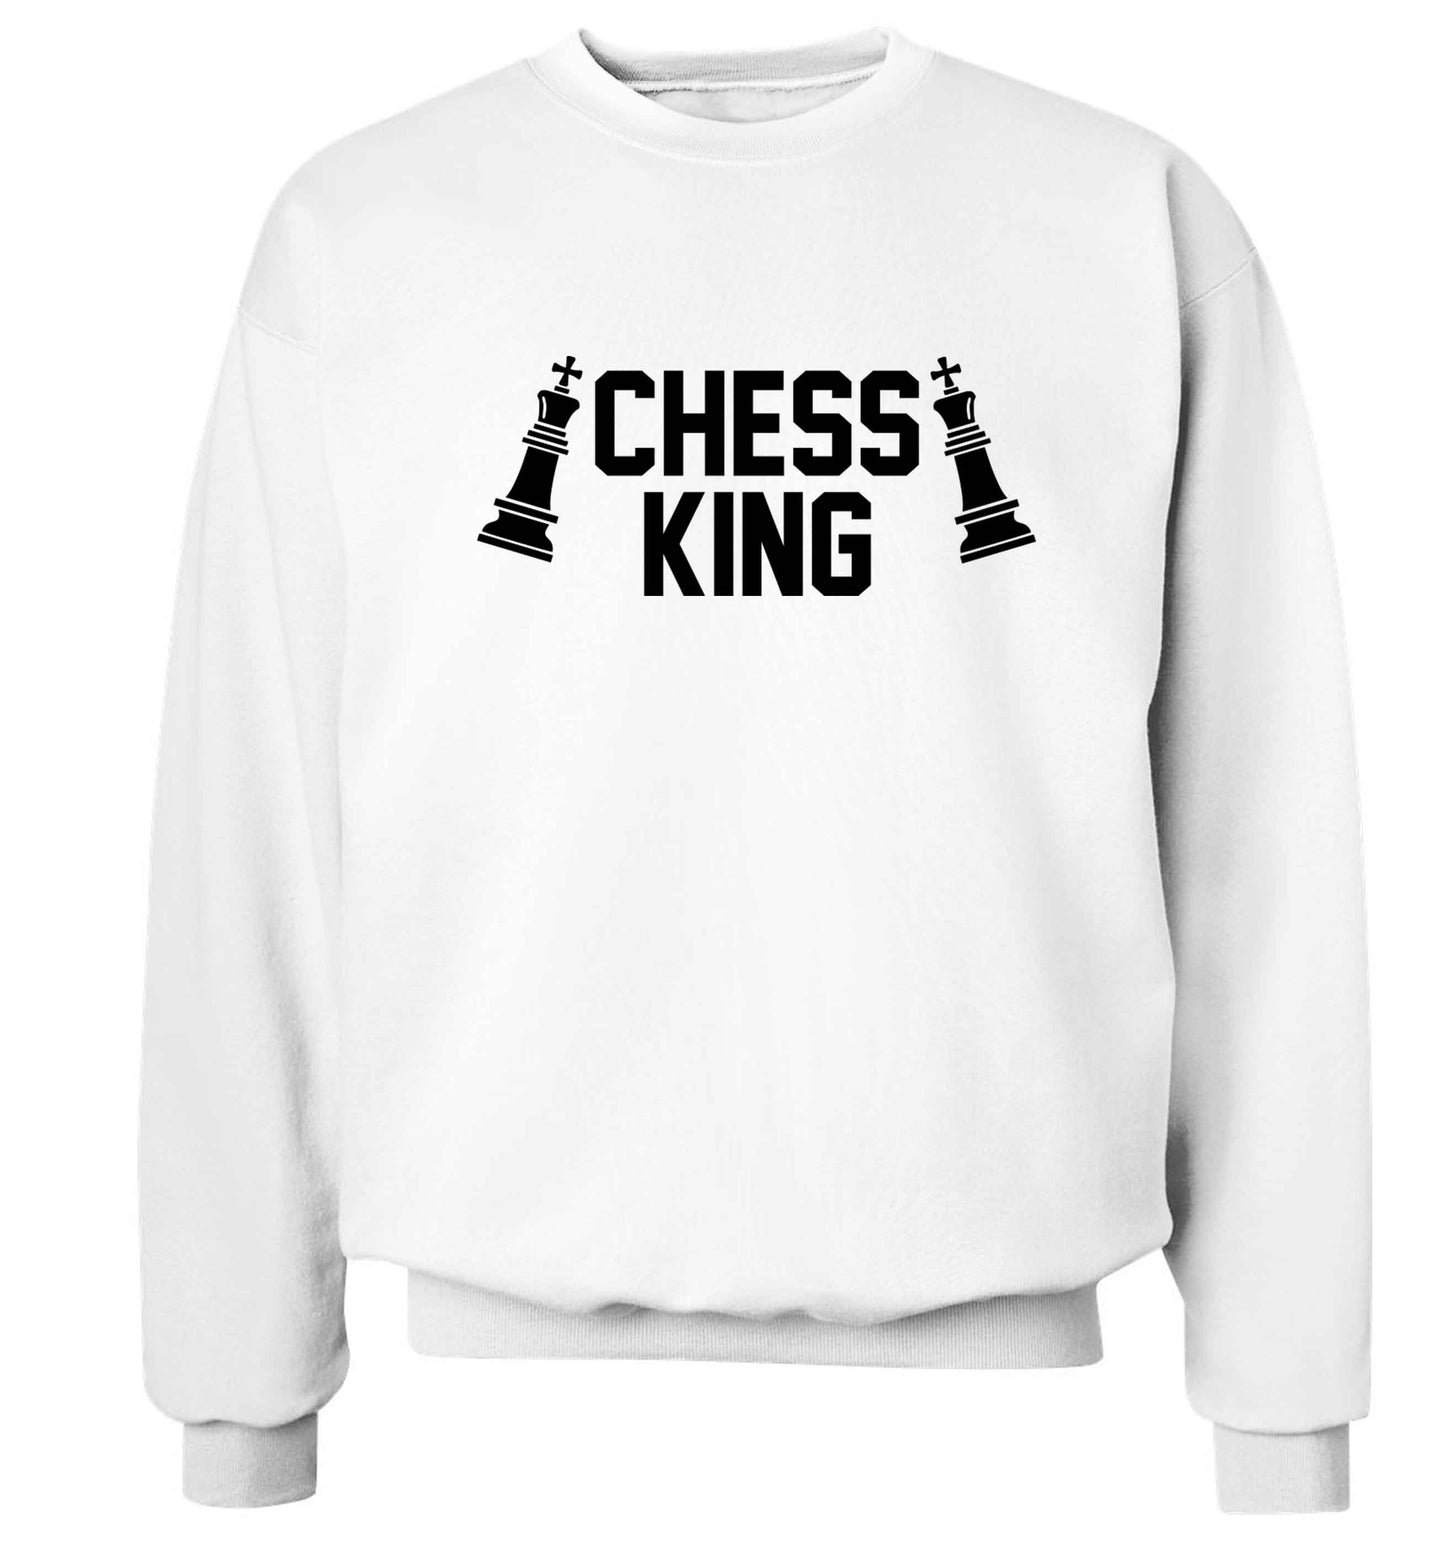 Chess king Adult's unisex white Sweater 2XL